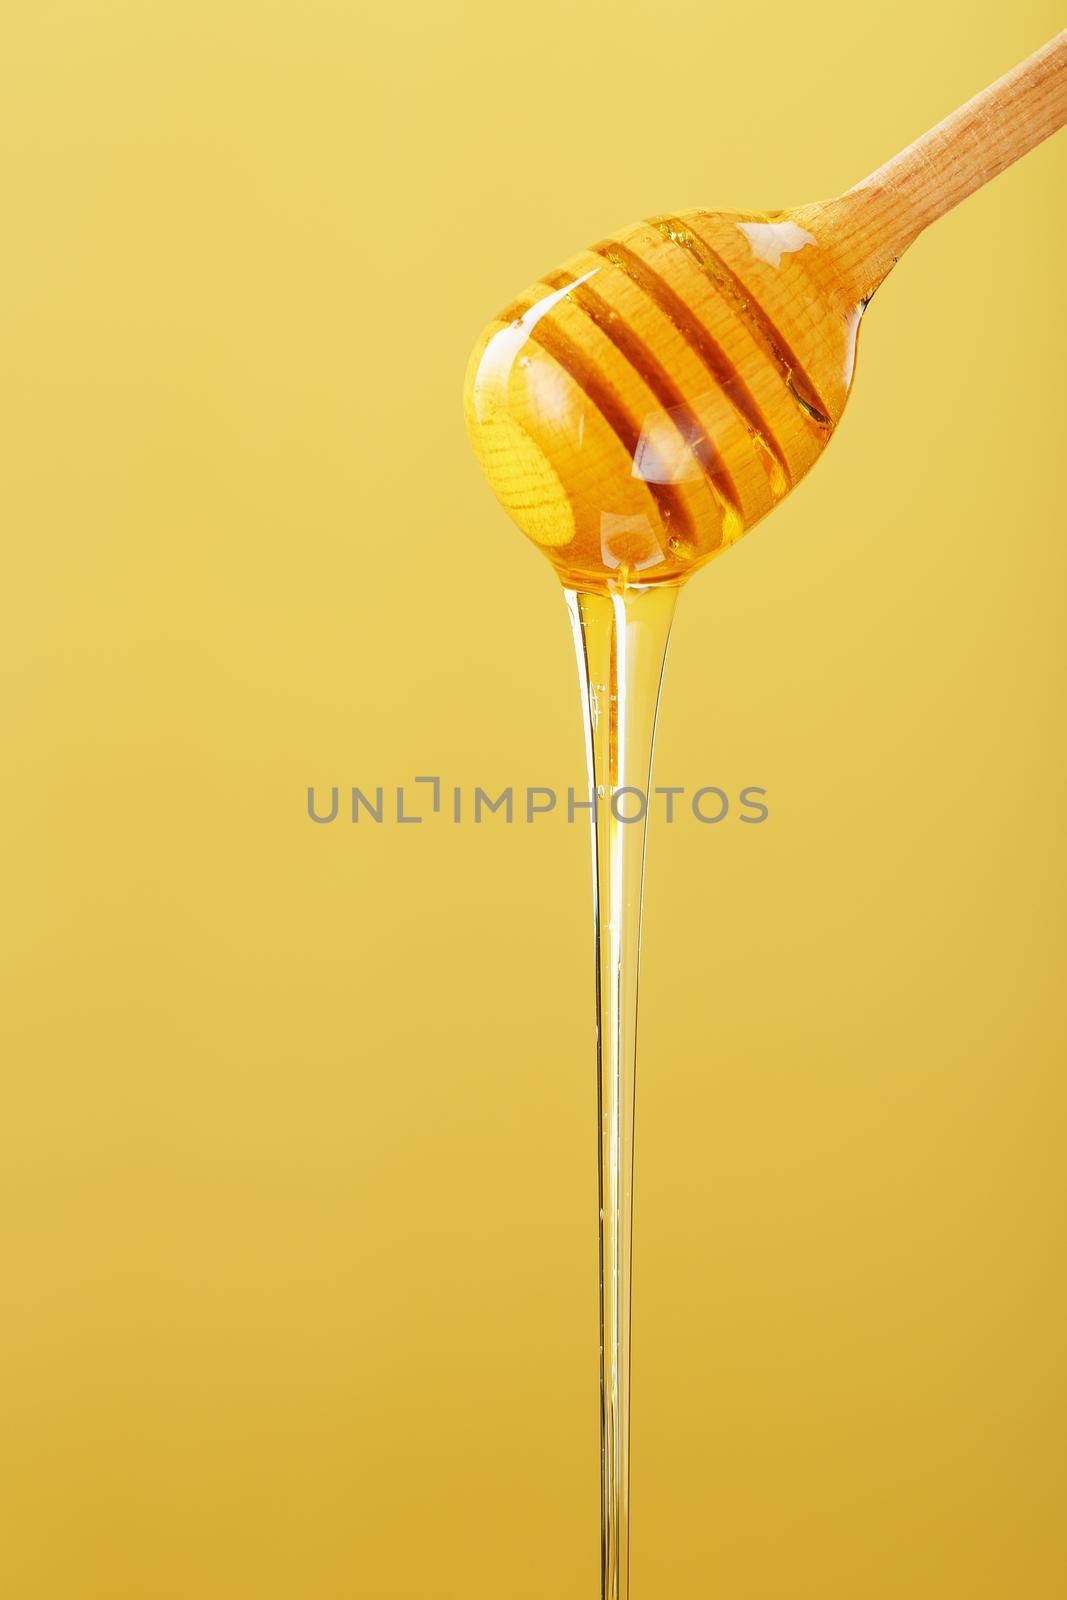 Golden honey trickles from a wooden honey dipper on a yellow background. Healthy food diet concept, ecologically pure product